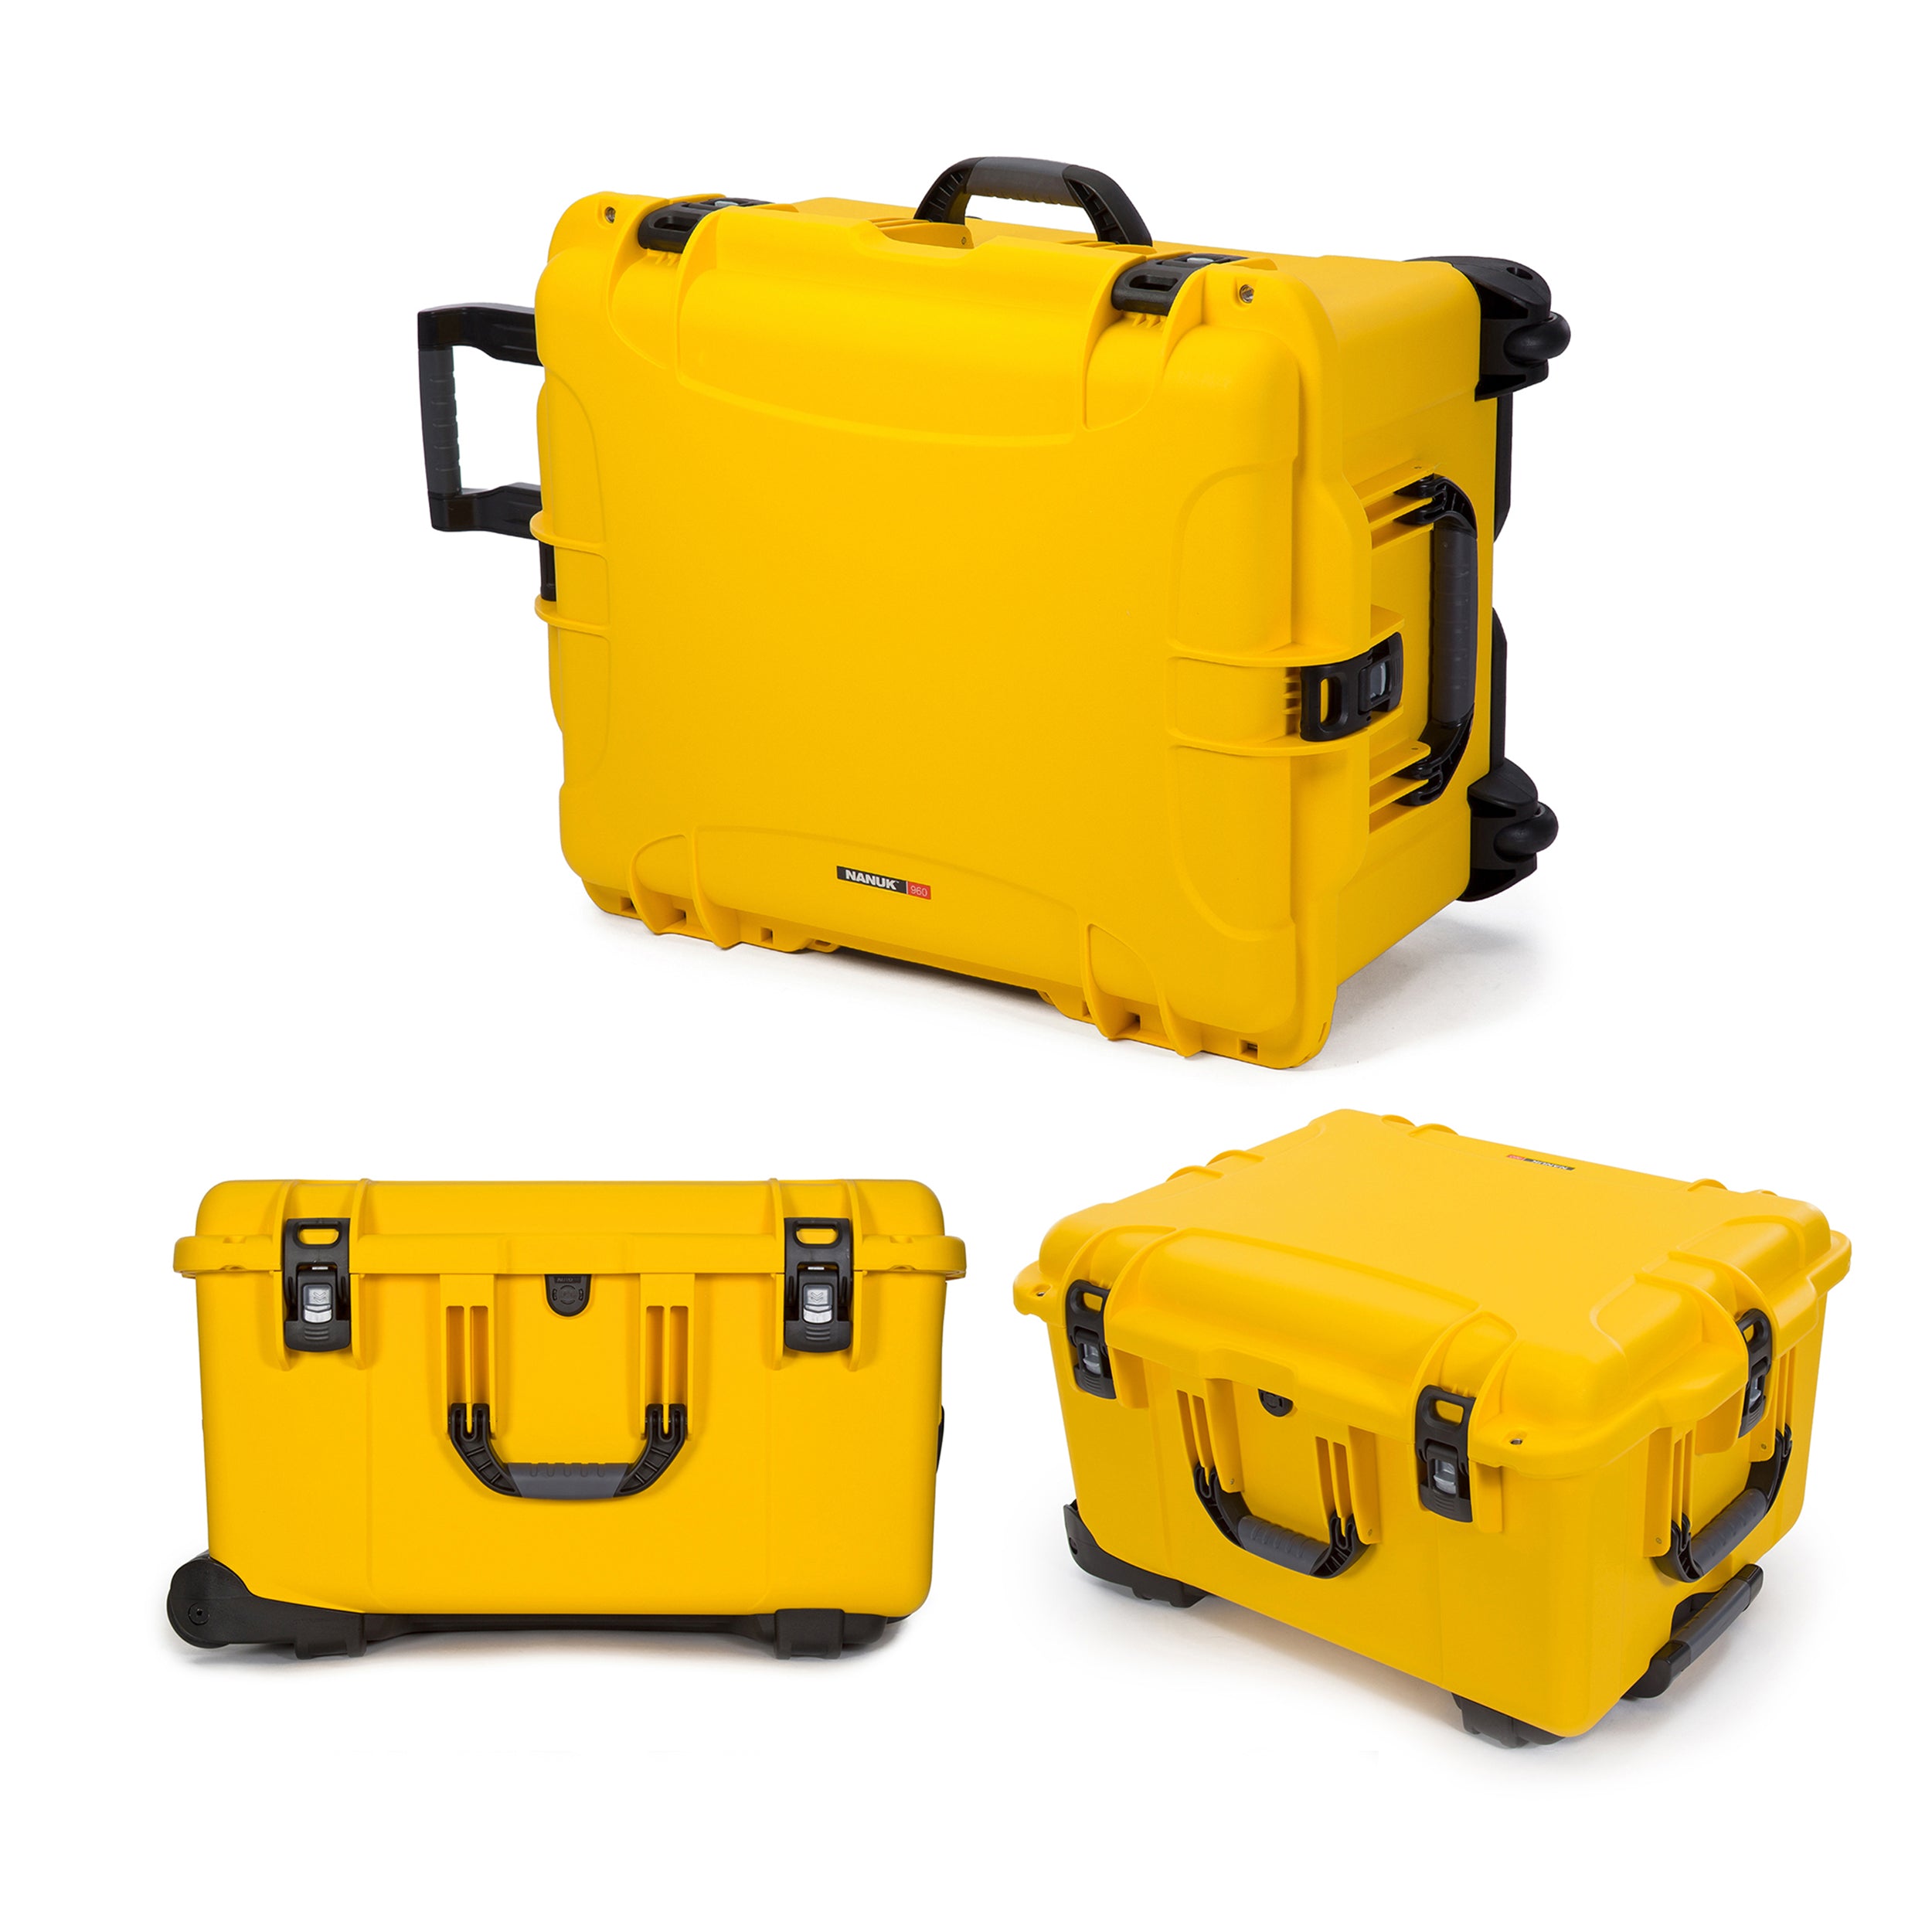 Nanuk Ronin MX Waterproof Hard Case with Wheels and Custom Foam Insert for Ronin MX Gimbal Stabilizer Systems - Yellow